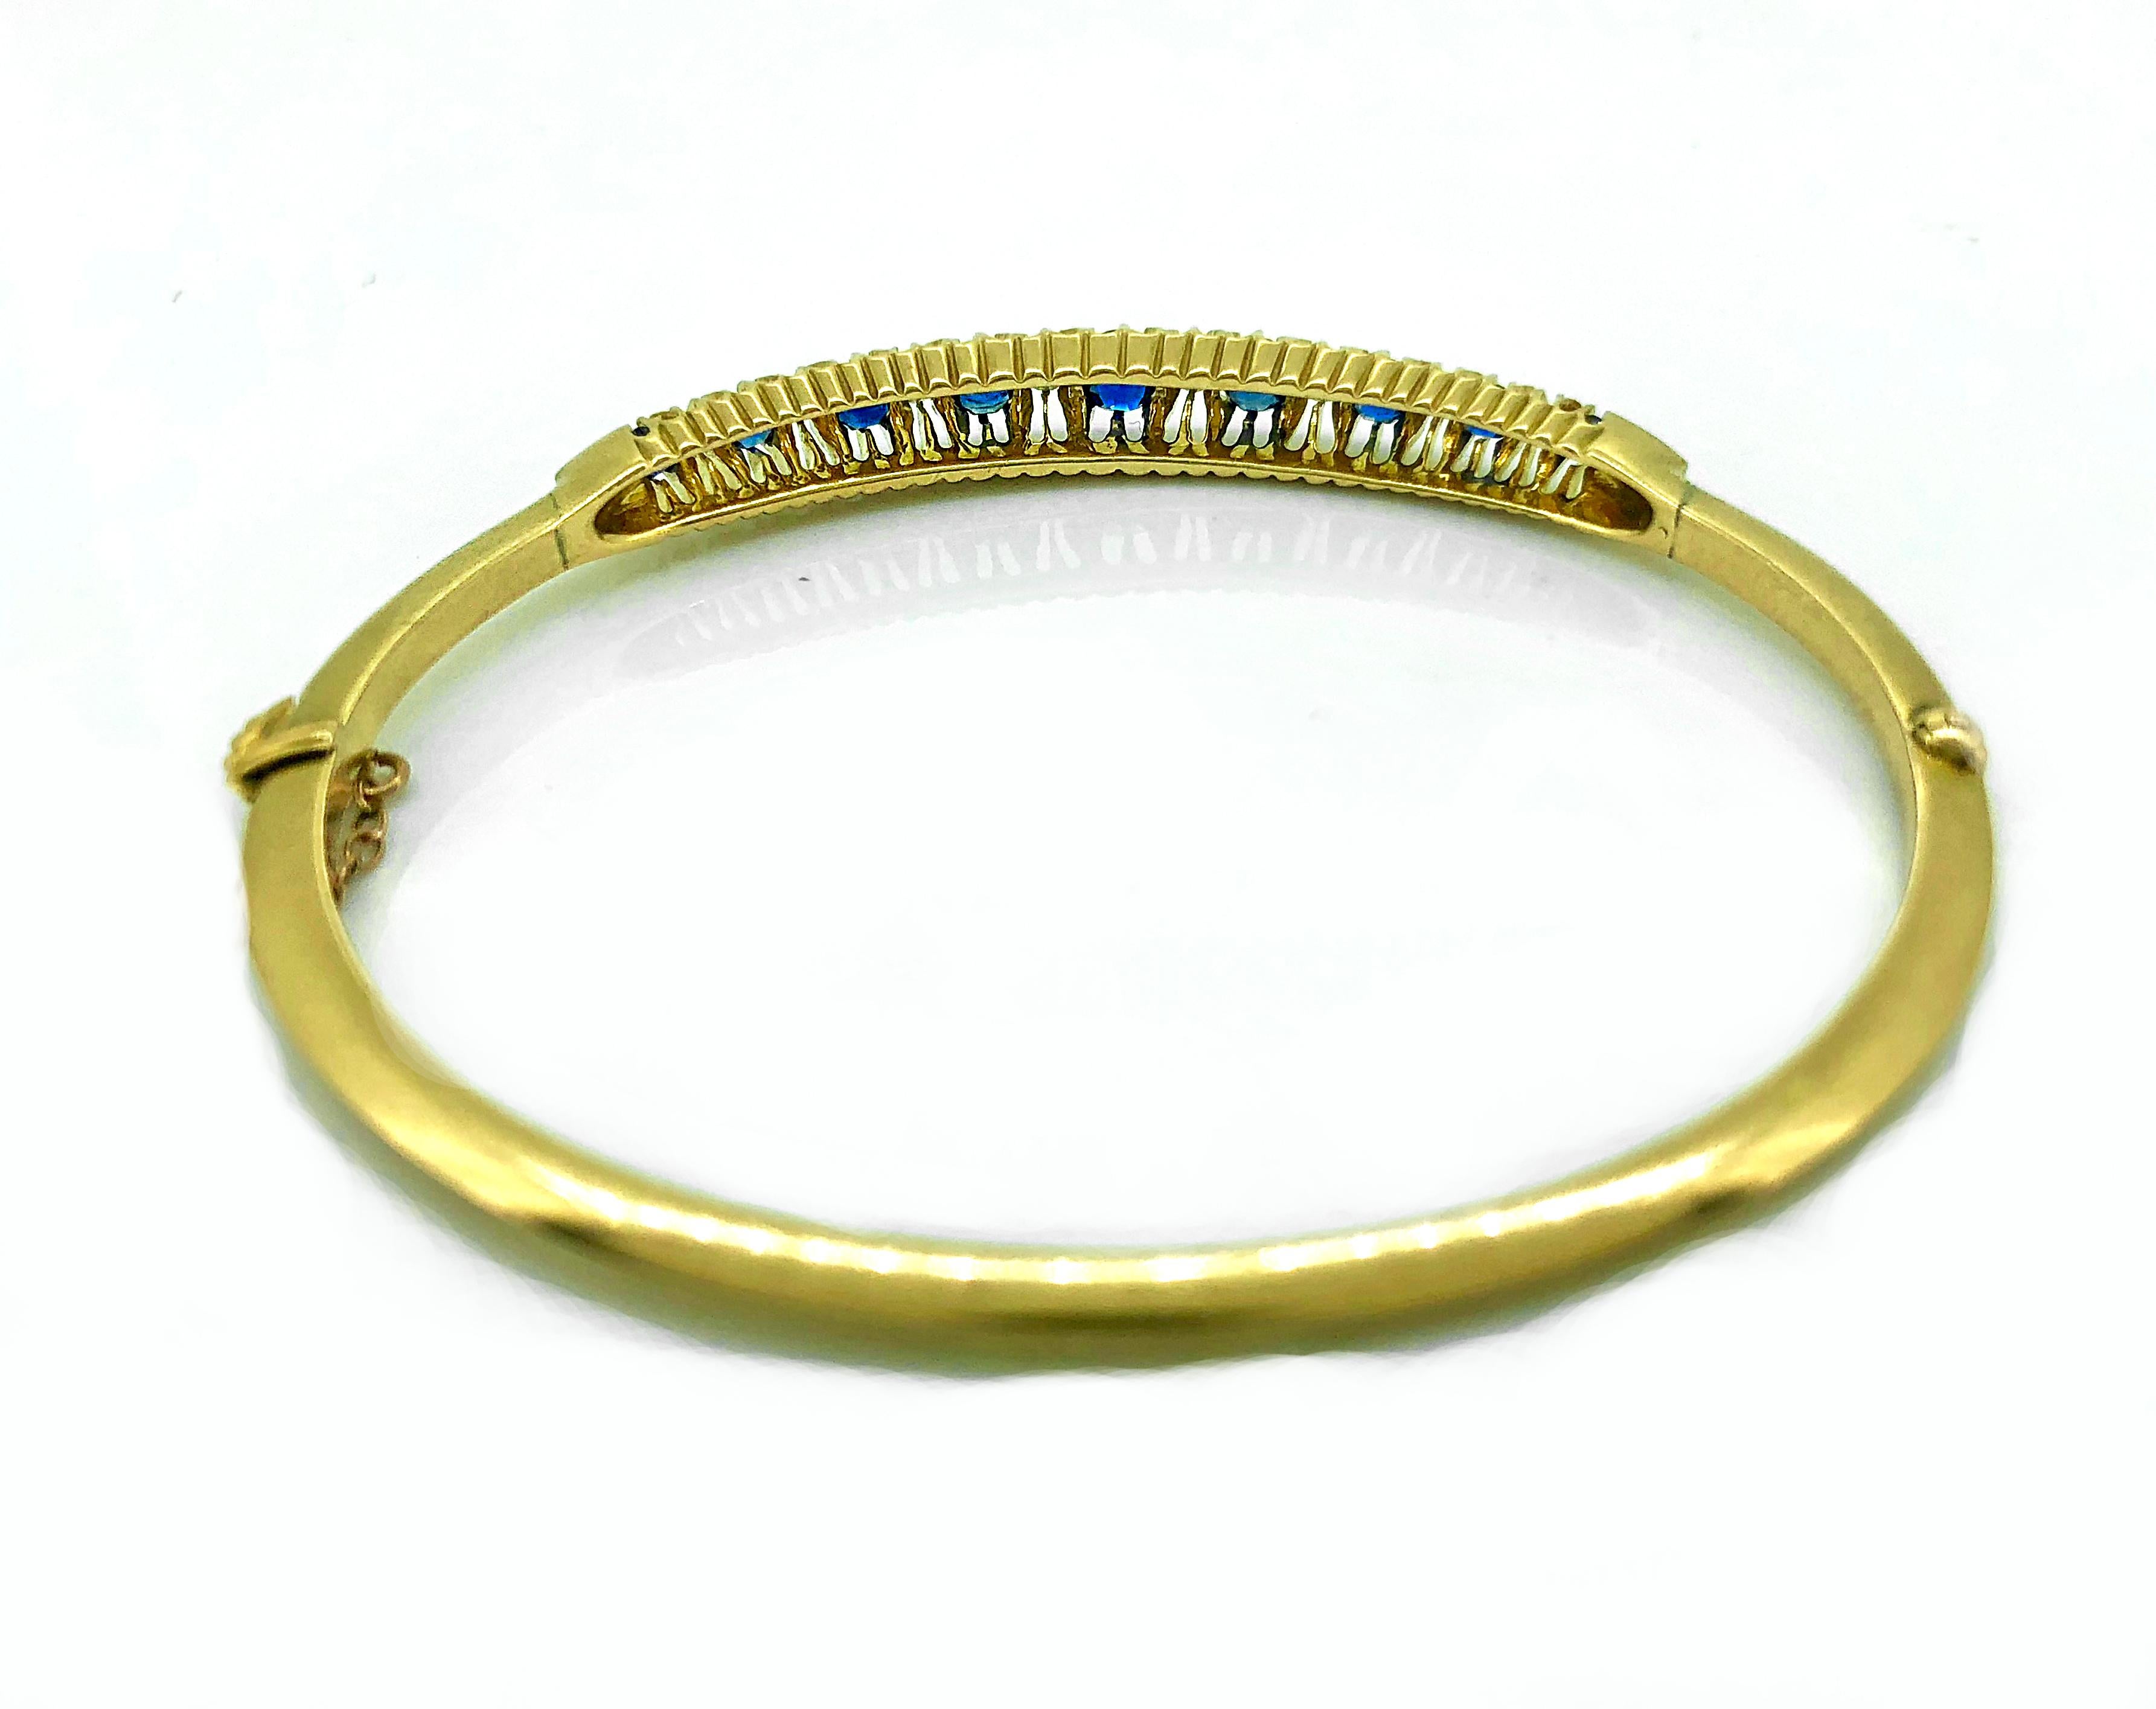 A completely original Victorian sapphire and diamond Antique bangle bracelet featuring 1.33ct. apx. T.W. of natural vivid blue-Antique cushion cut sapphires and .20ct. apx. T.W. of old mine cut diamonds that are I1-I2 clarity and D-E color. As are